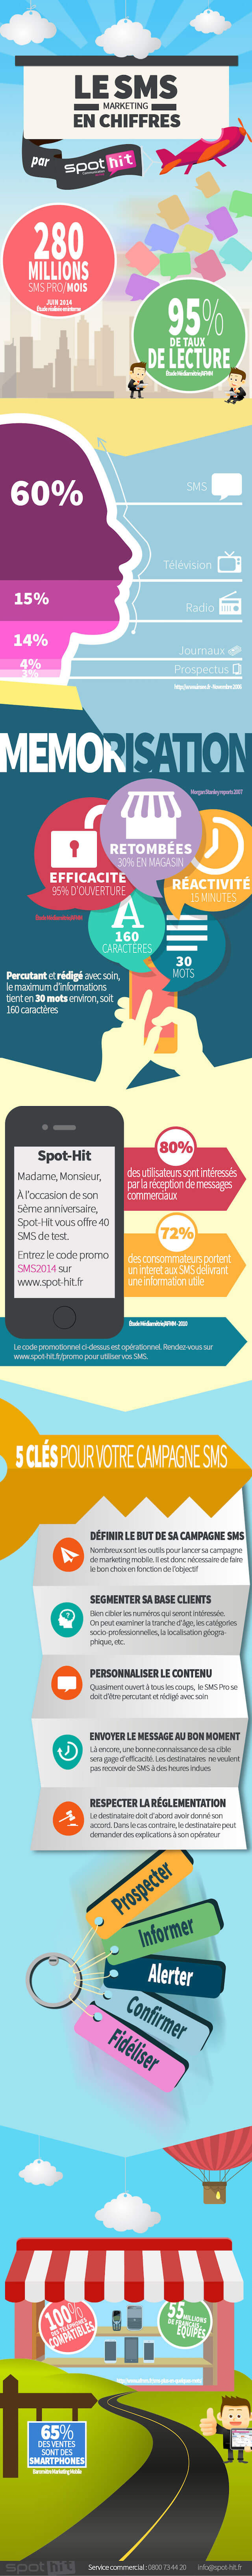 infographie-sms-pro